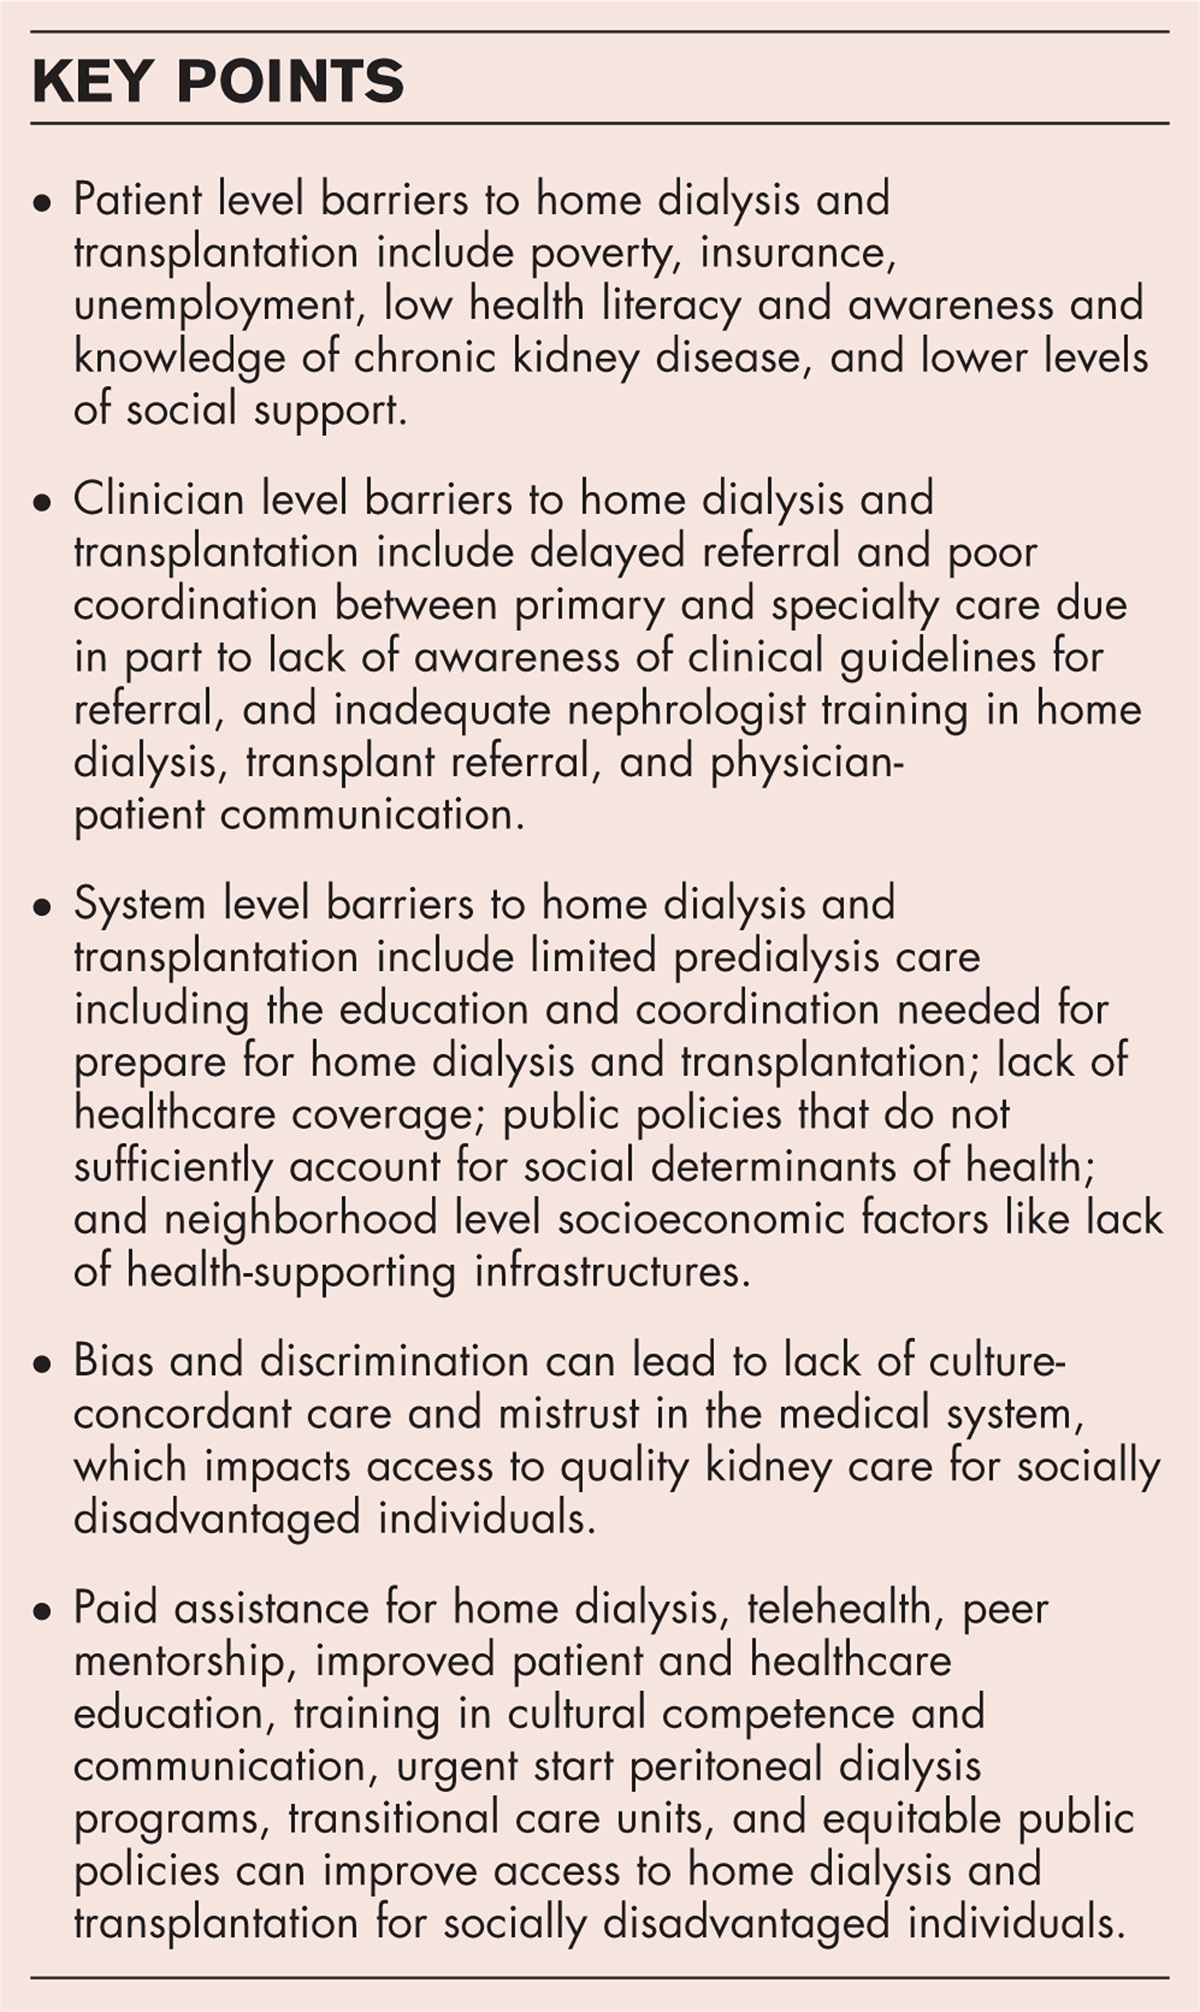 Barriers to home dialysis and kidney transplantation for socially disadvantaged individuals